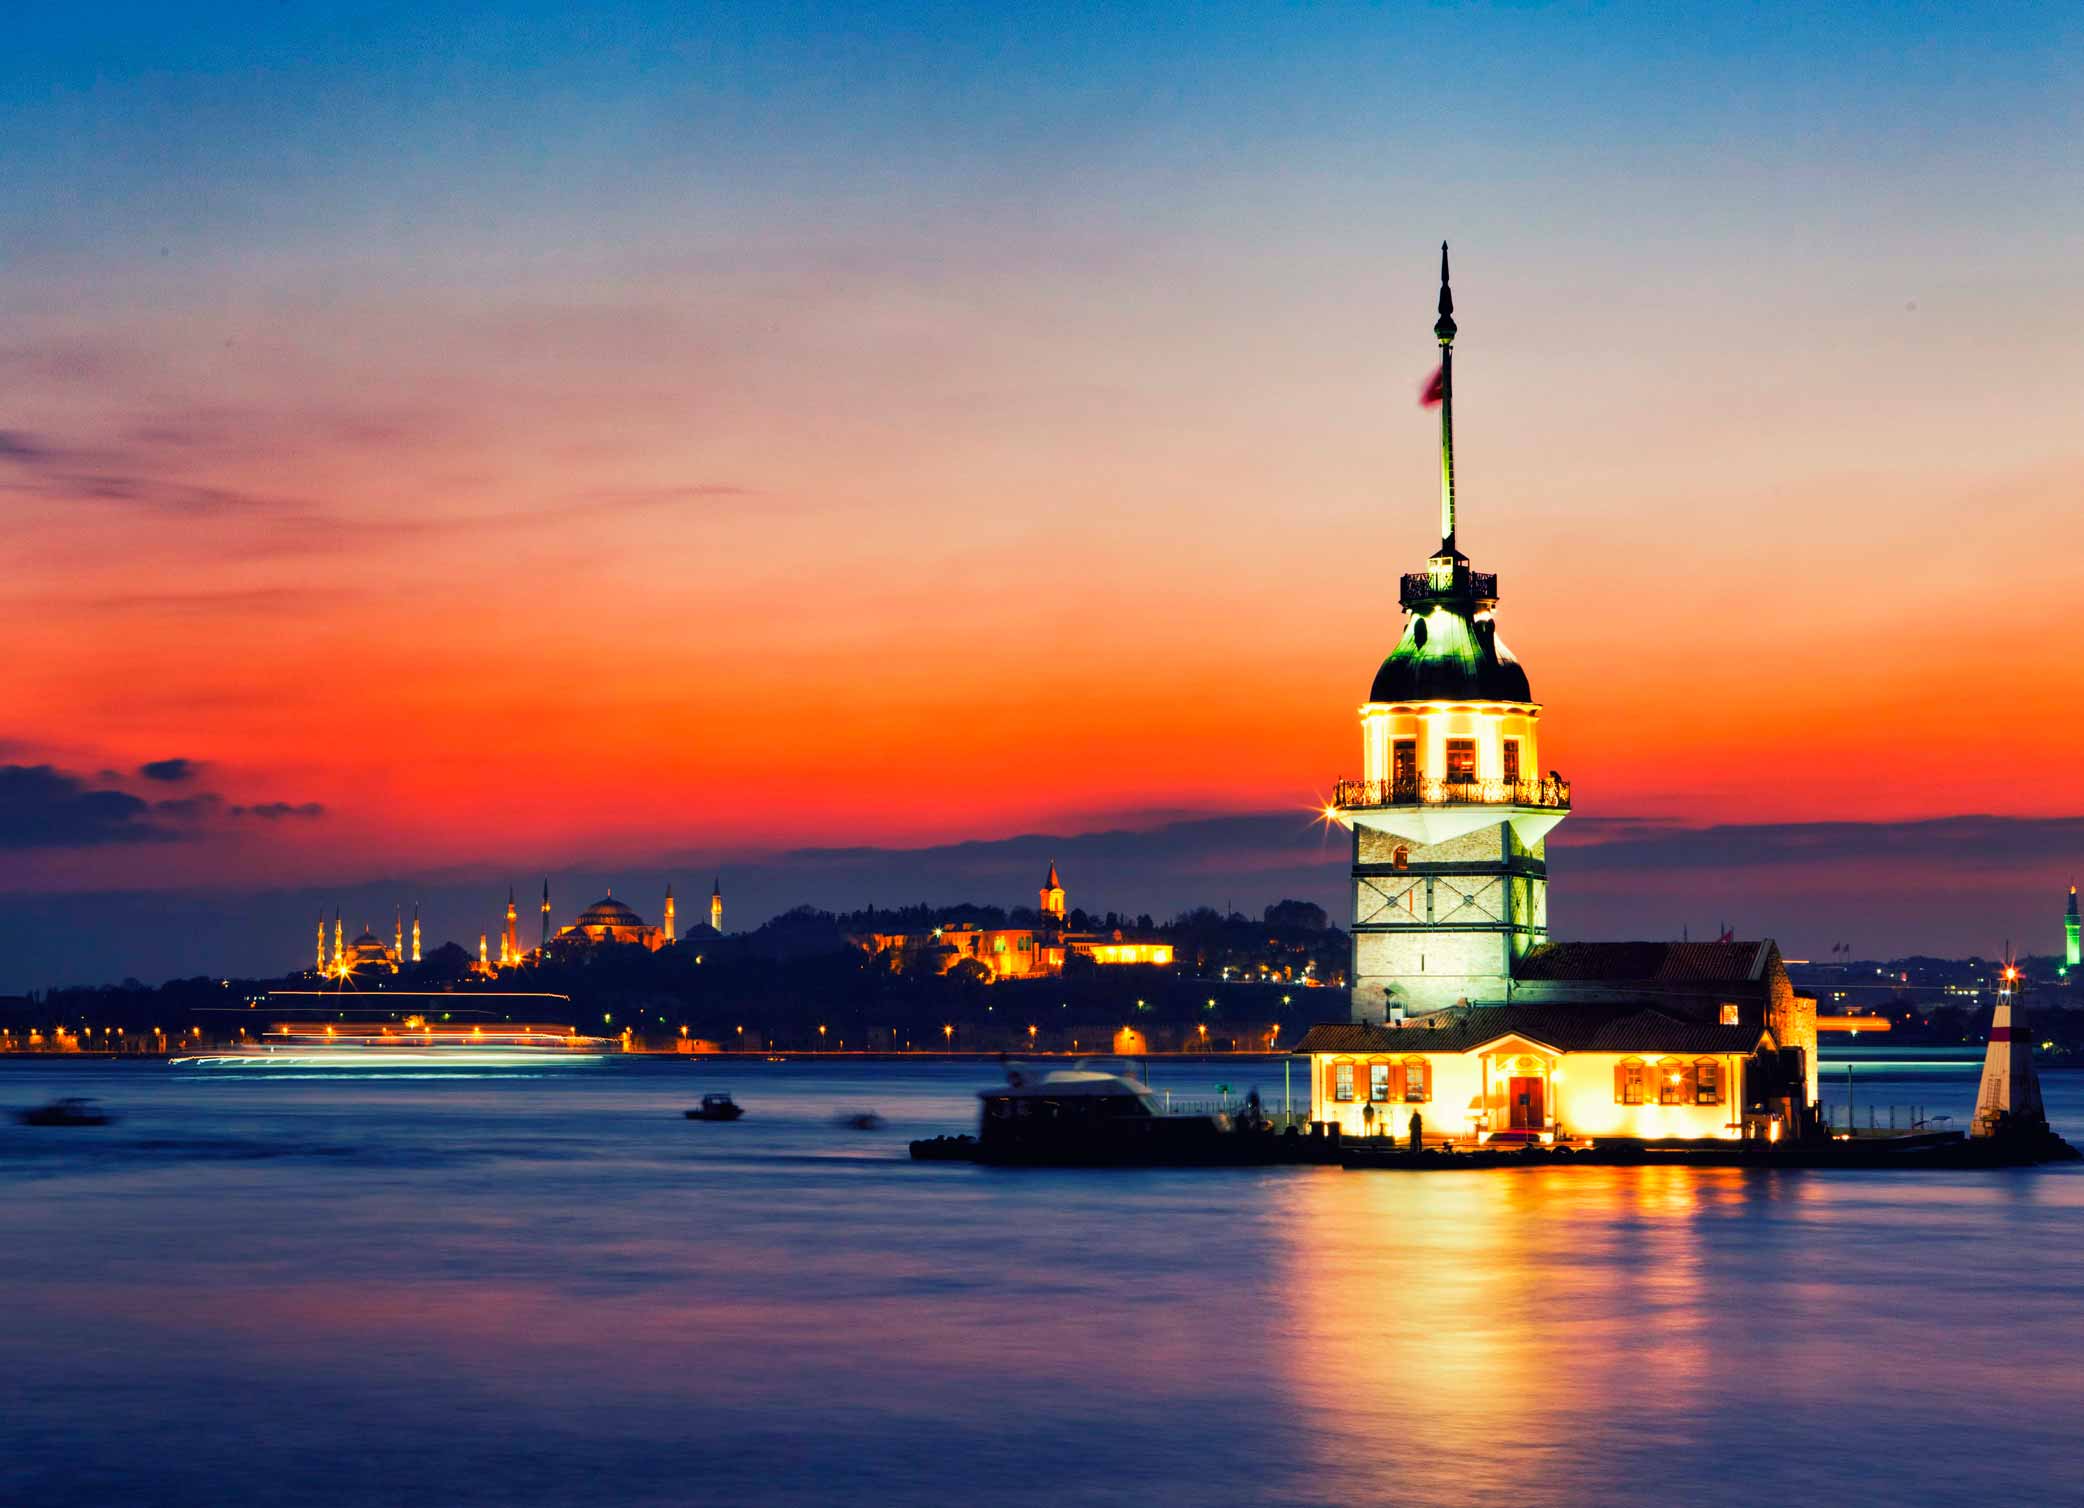 All About Istanbul